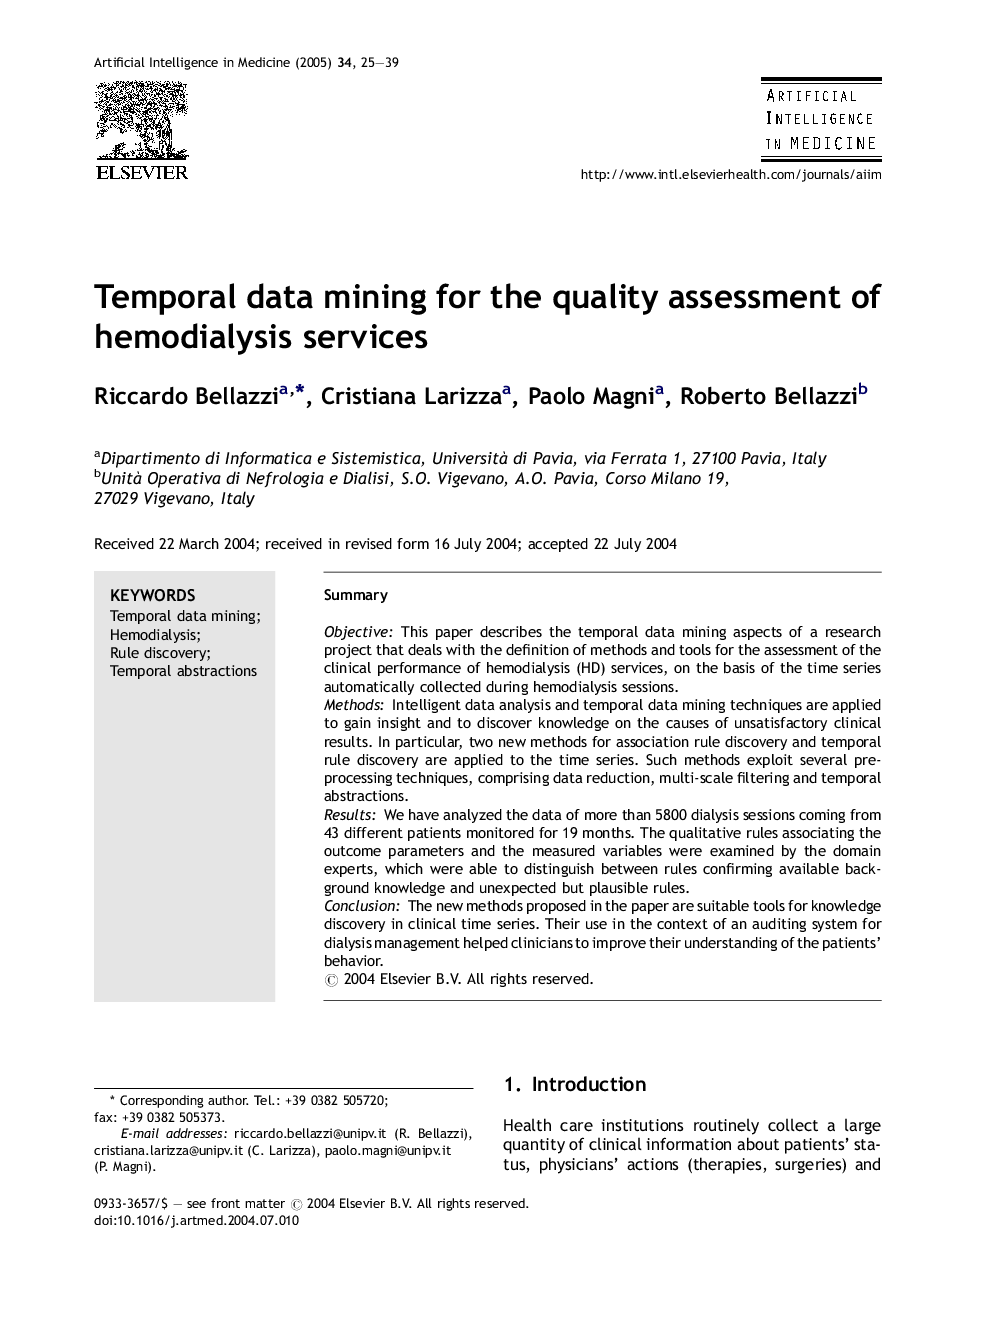 Temporal data mining for the quality assessment of hemodialysis services